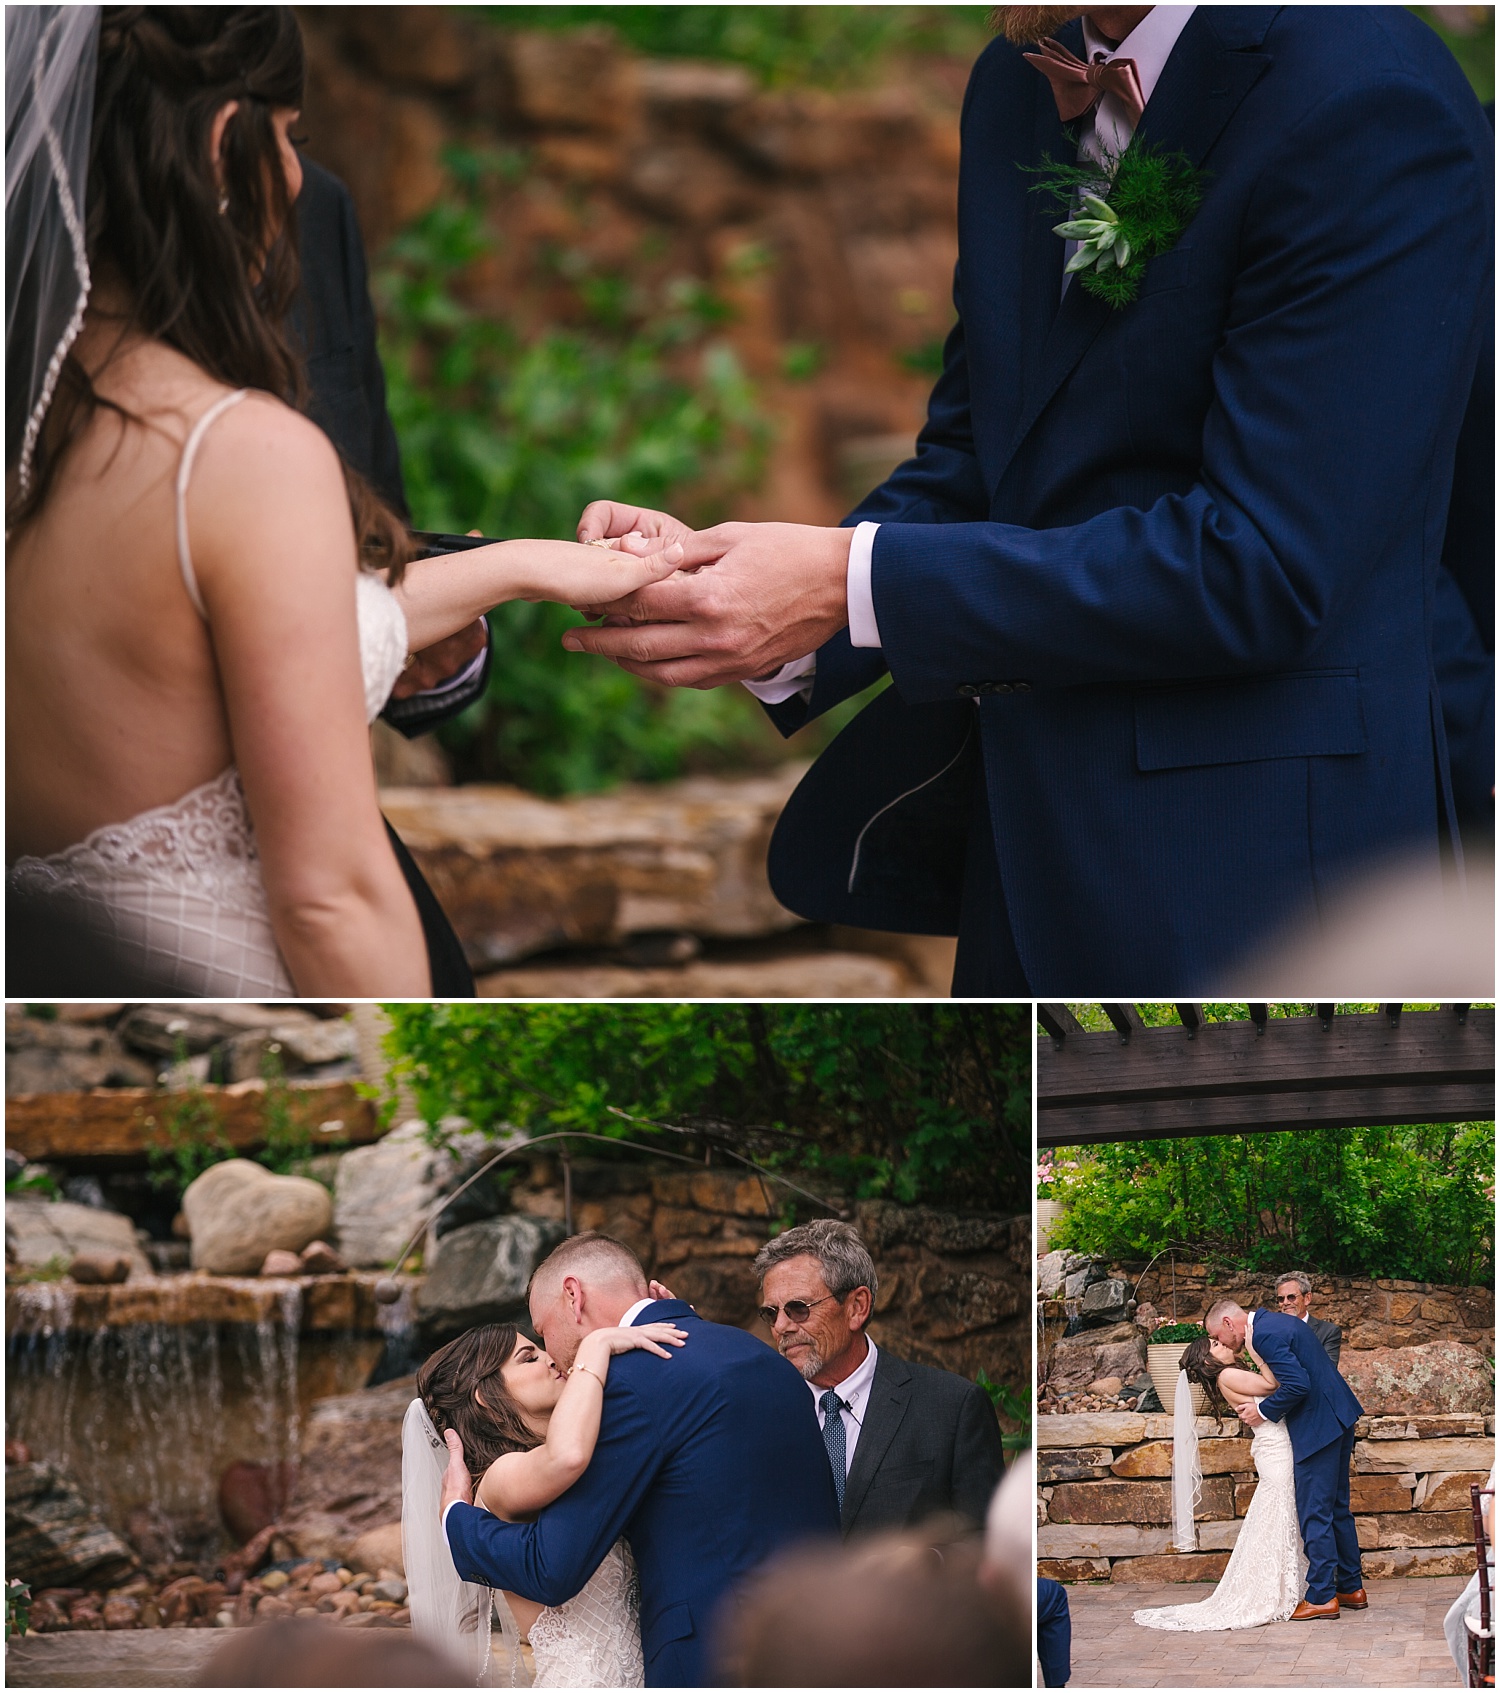 Bride and groom's first kiss at Craftwood Inn wedding ceremony